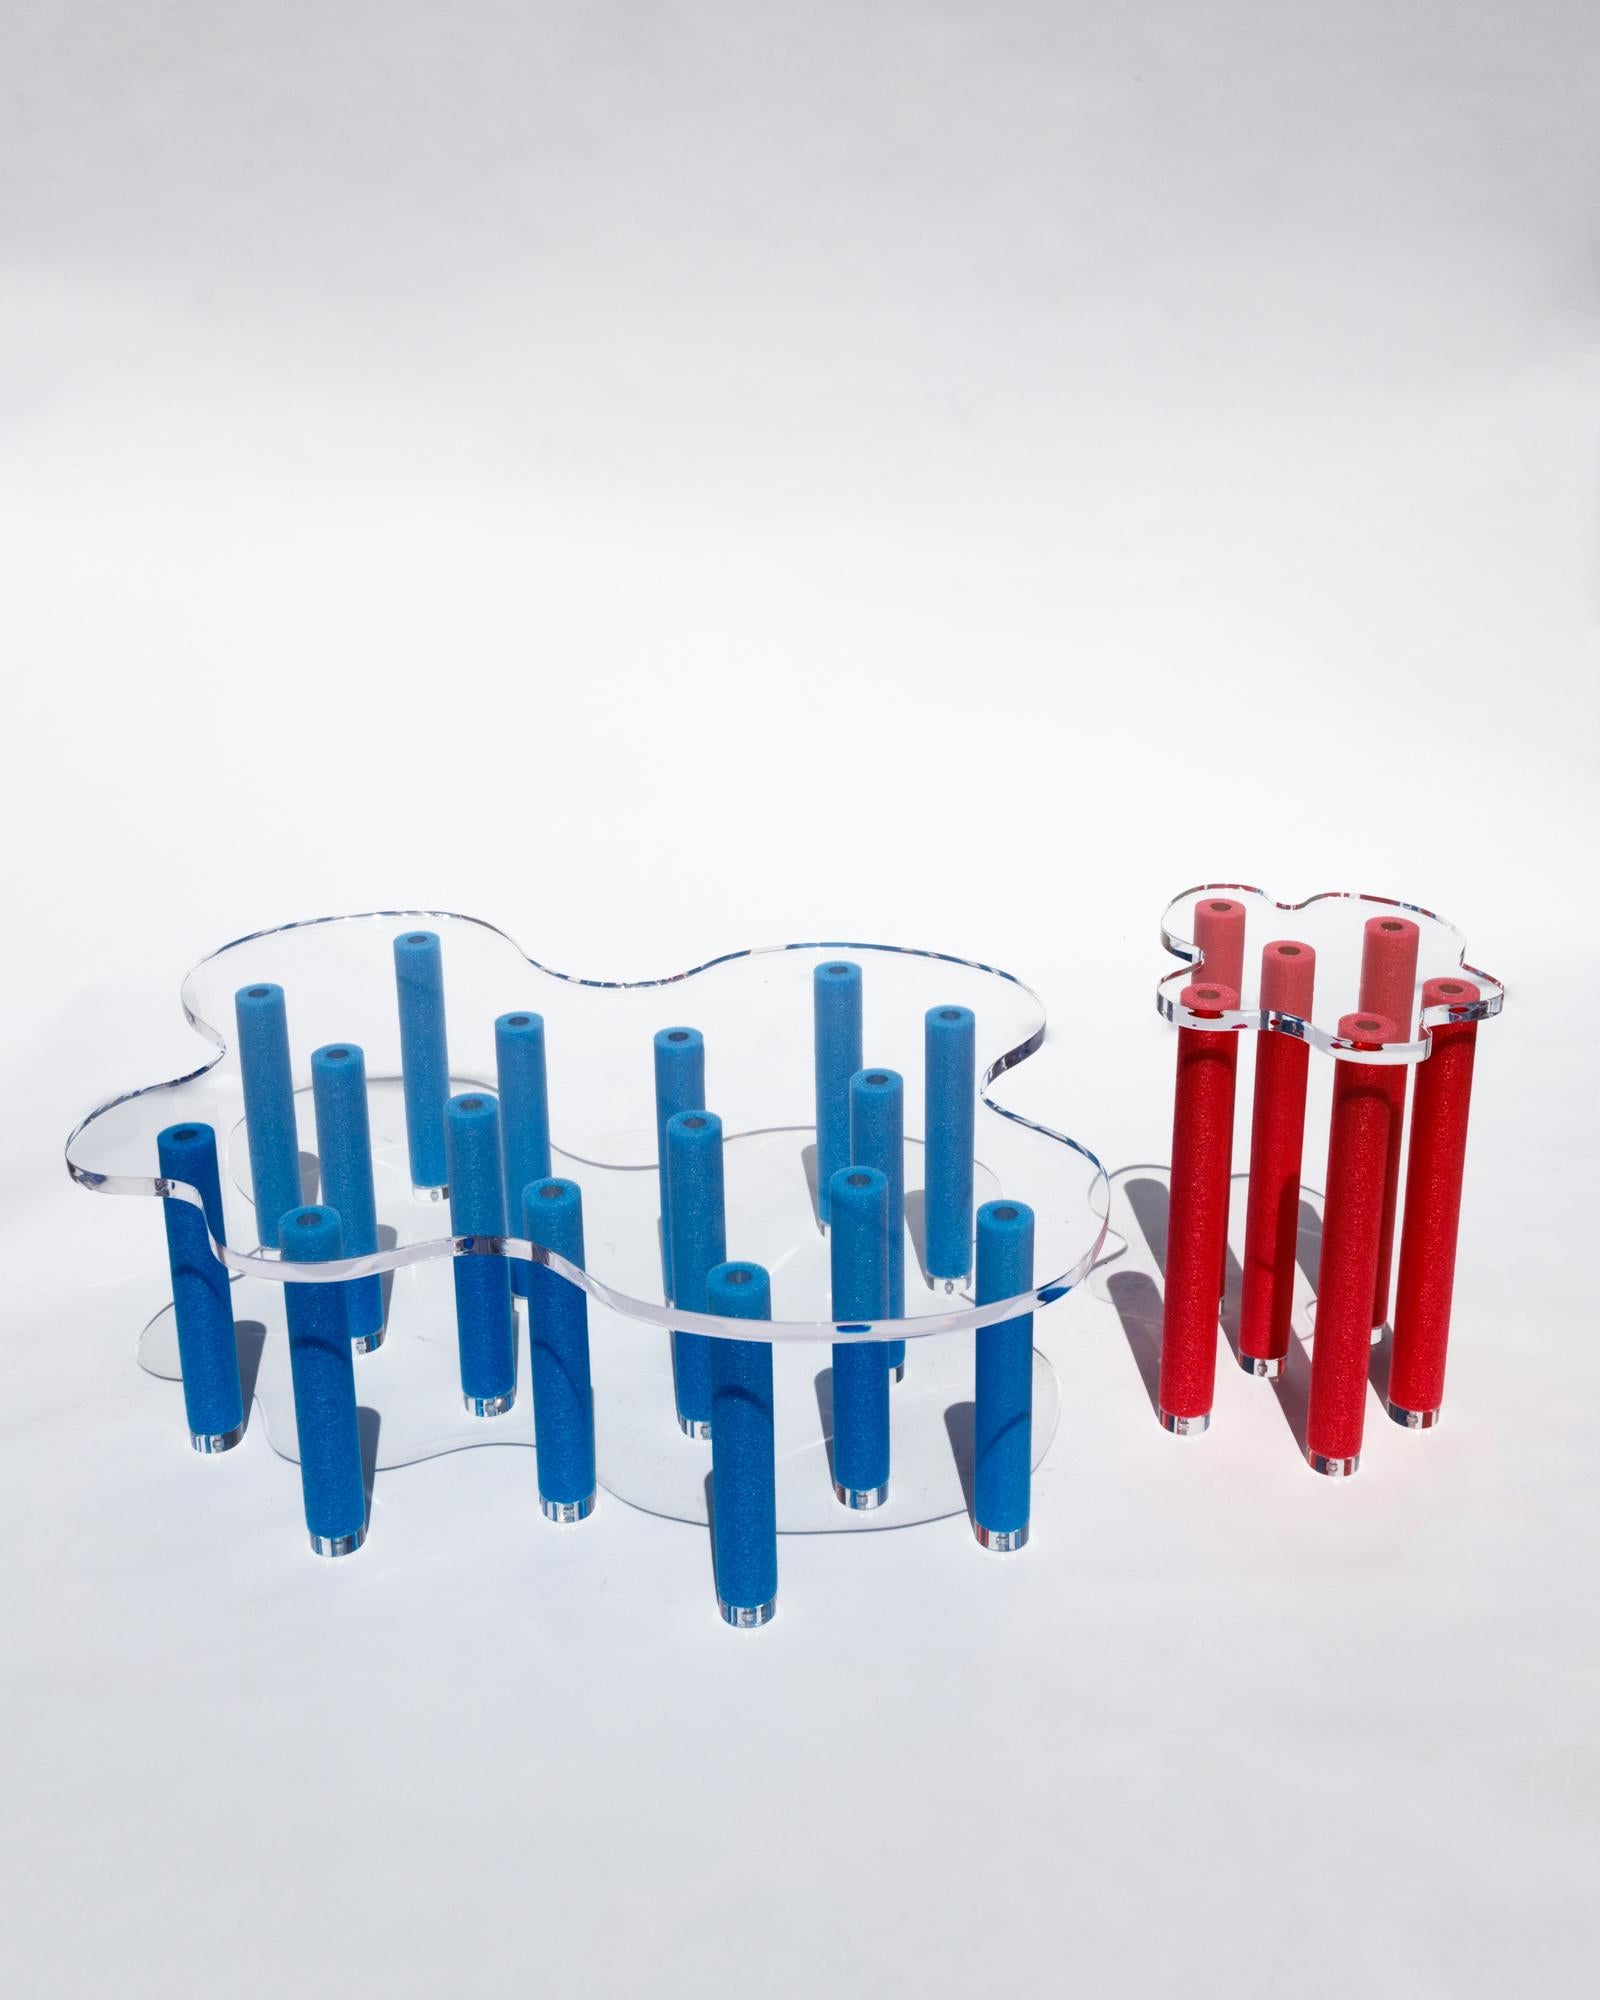 Inspired by the endless summer, pool party culture that is often associated with Los Angeles, the pool table and Jacuzzi table are a playful experiment in form and materiality. The wavy acrylic table tops take on the form of irregular shaped pools